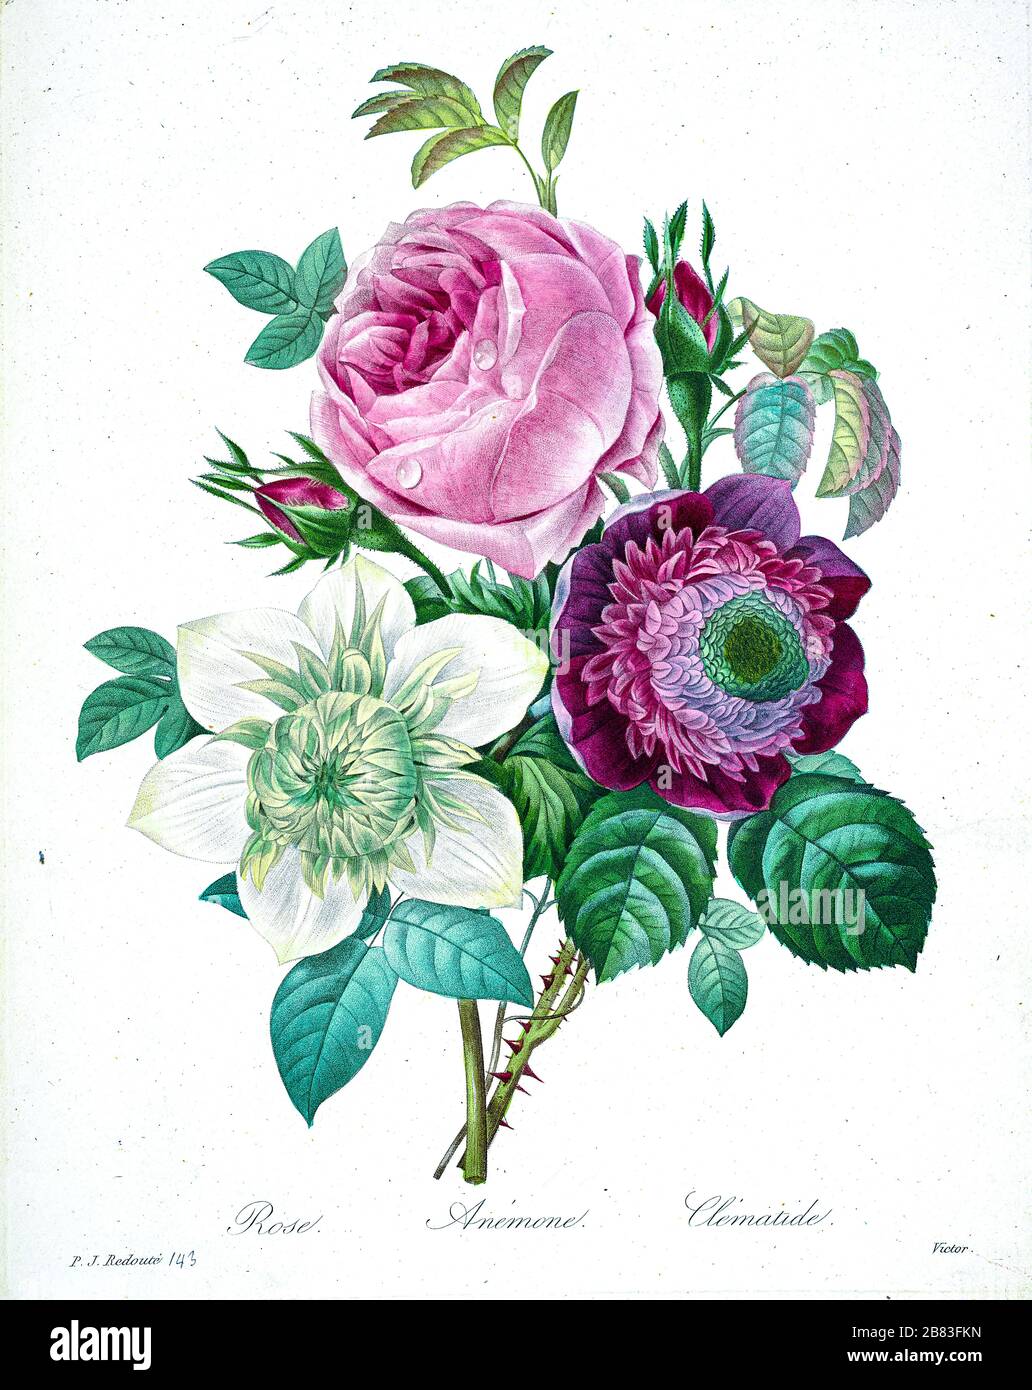 19th-century hand painted Engraving illustration of a bouquet of flowers with Rose, anemone and clematis, by Pierre-Joseph Redoute. Published in Choix Des Plus Belles Fleurs, Paris (1827). by Redouté, Pierre Joseph, 1759-1840.; Chapuis, Jean Baptiste.; Ernest Panckoucke.; Langois, Dr.; Bessin, R.; Victor, fl. ca. 1820-1850. Stock Photo